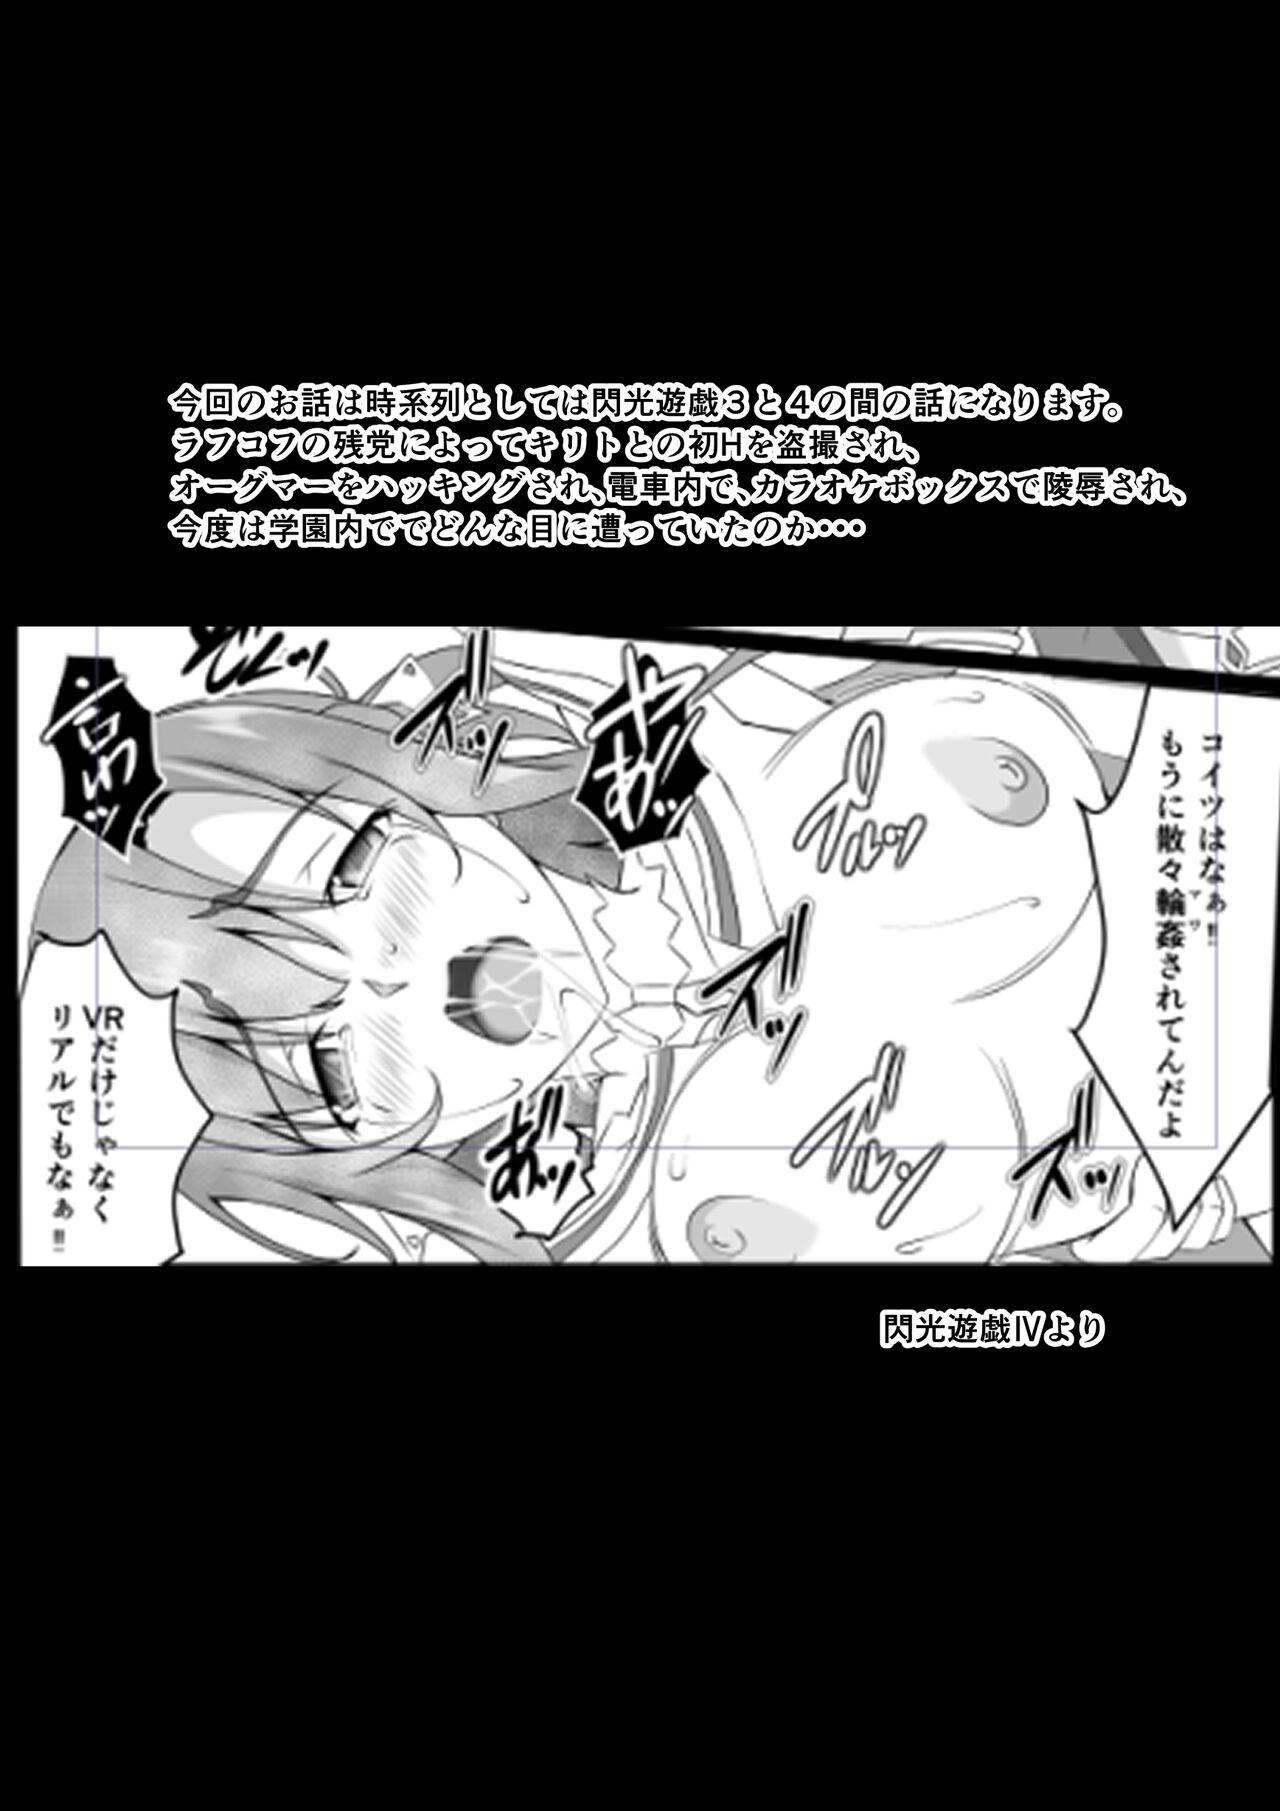 Toying 閃光遊戯番外 学園編 - Sword art online Point Of View - Page 3